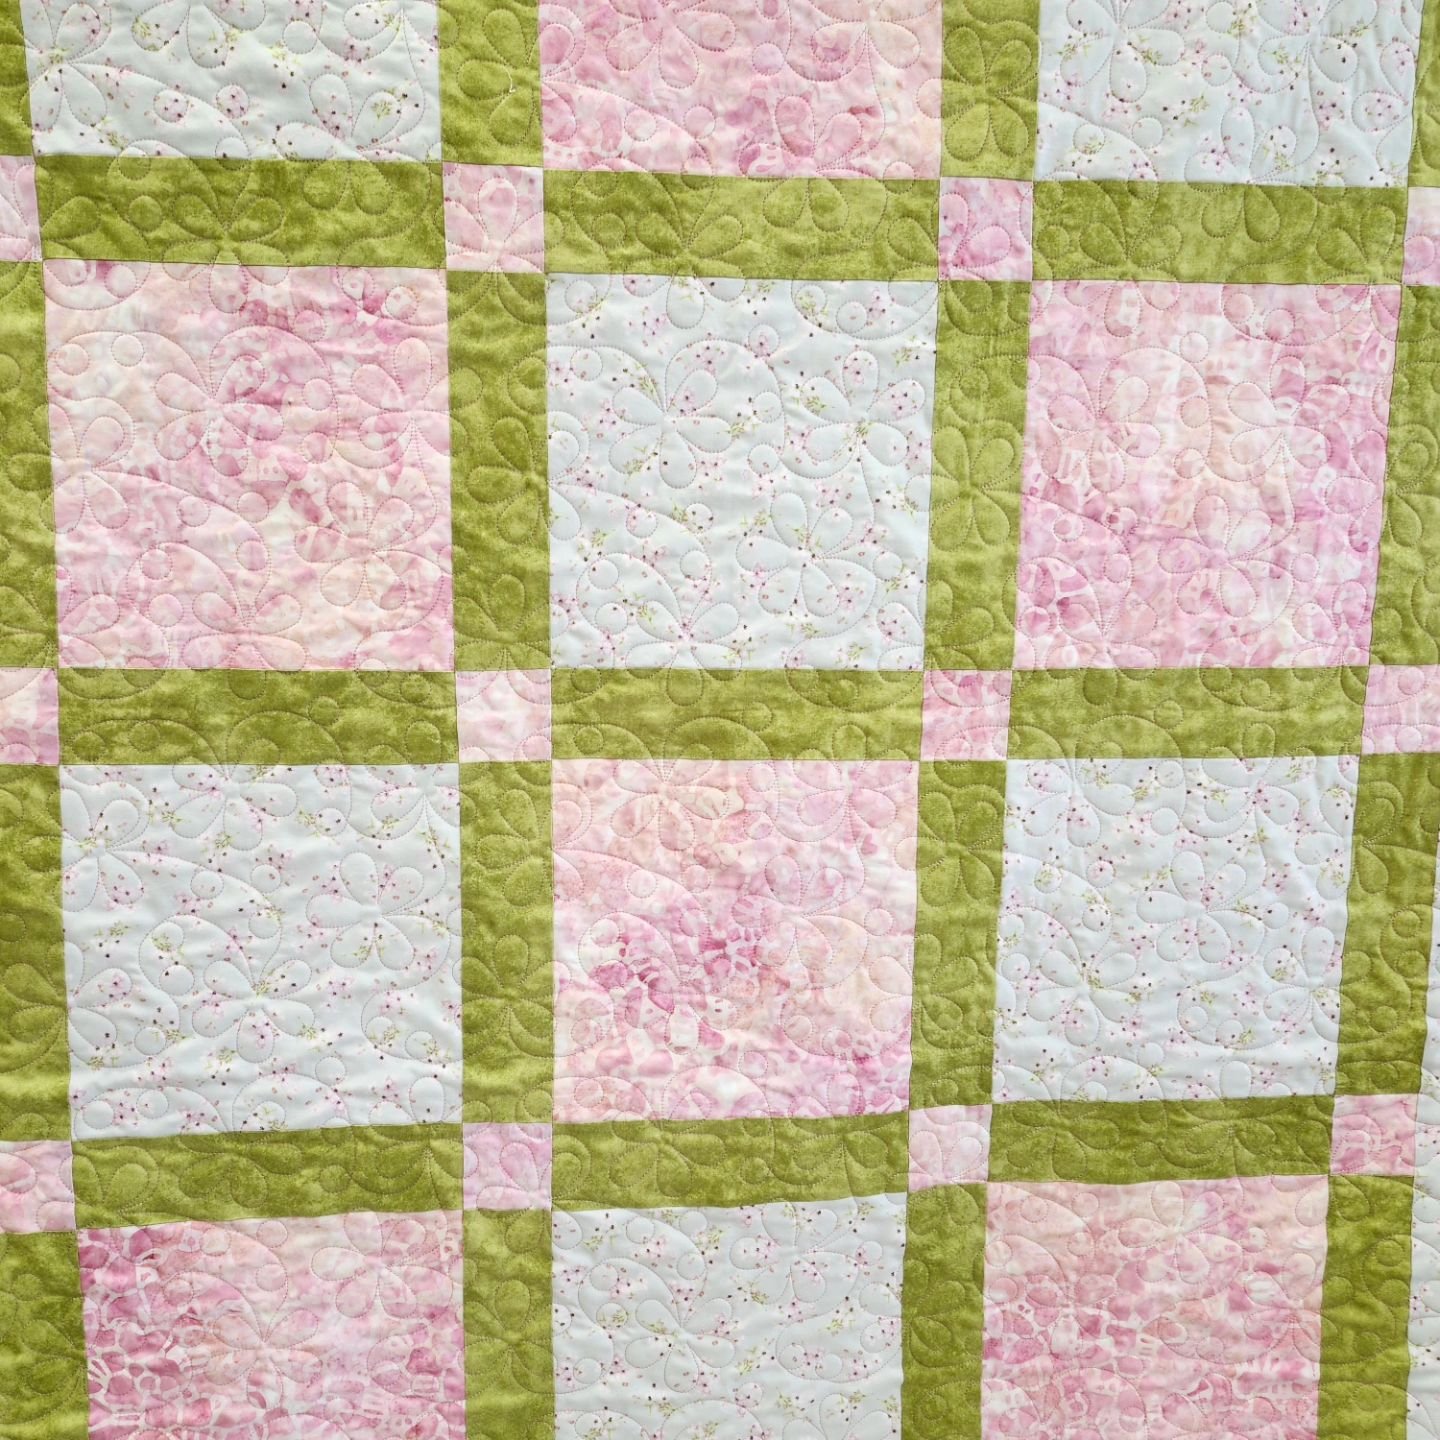 This is Mandy's first quilt since taking the certification class.  She chose a pattern called 'daisies galore' #longarmmachinerentals #quiltfun #quiltyourselfawesome #quilting #gammillstatlerstitcher #topstitchery